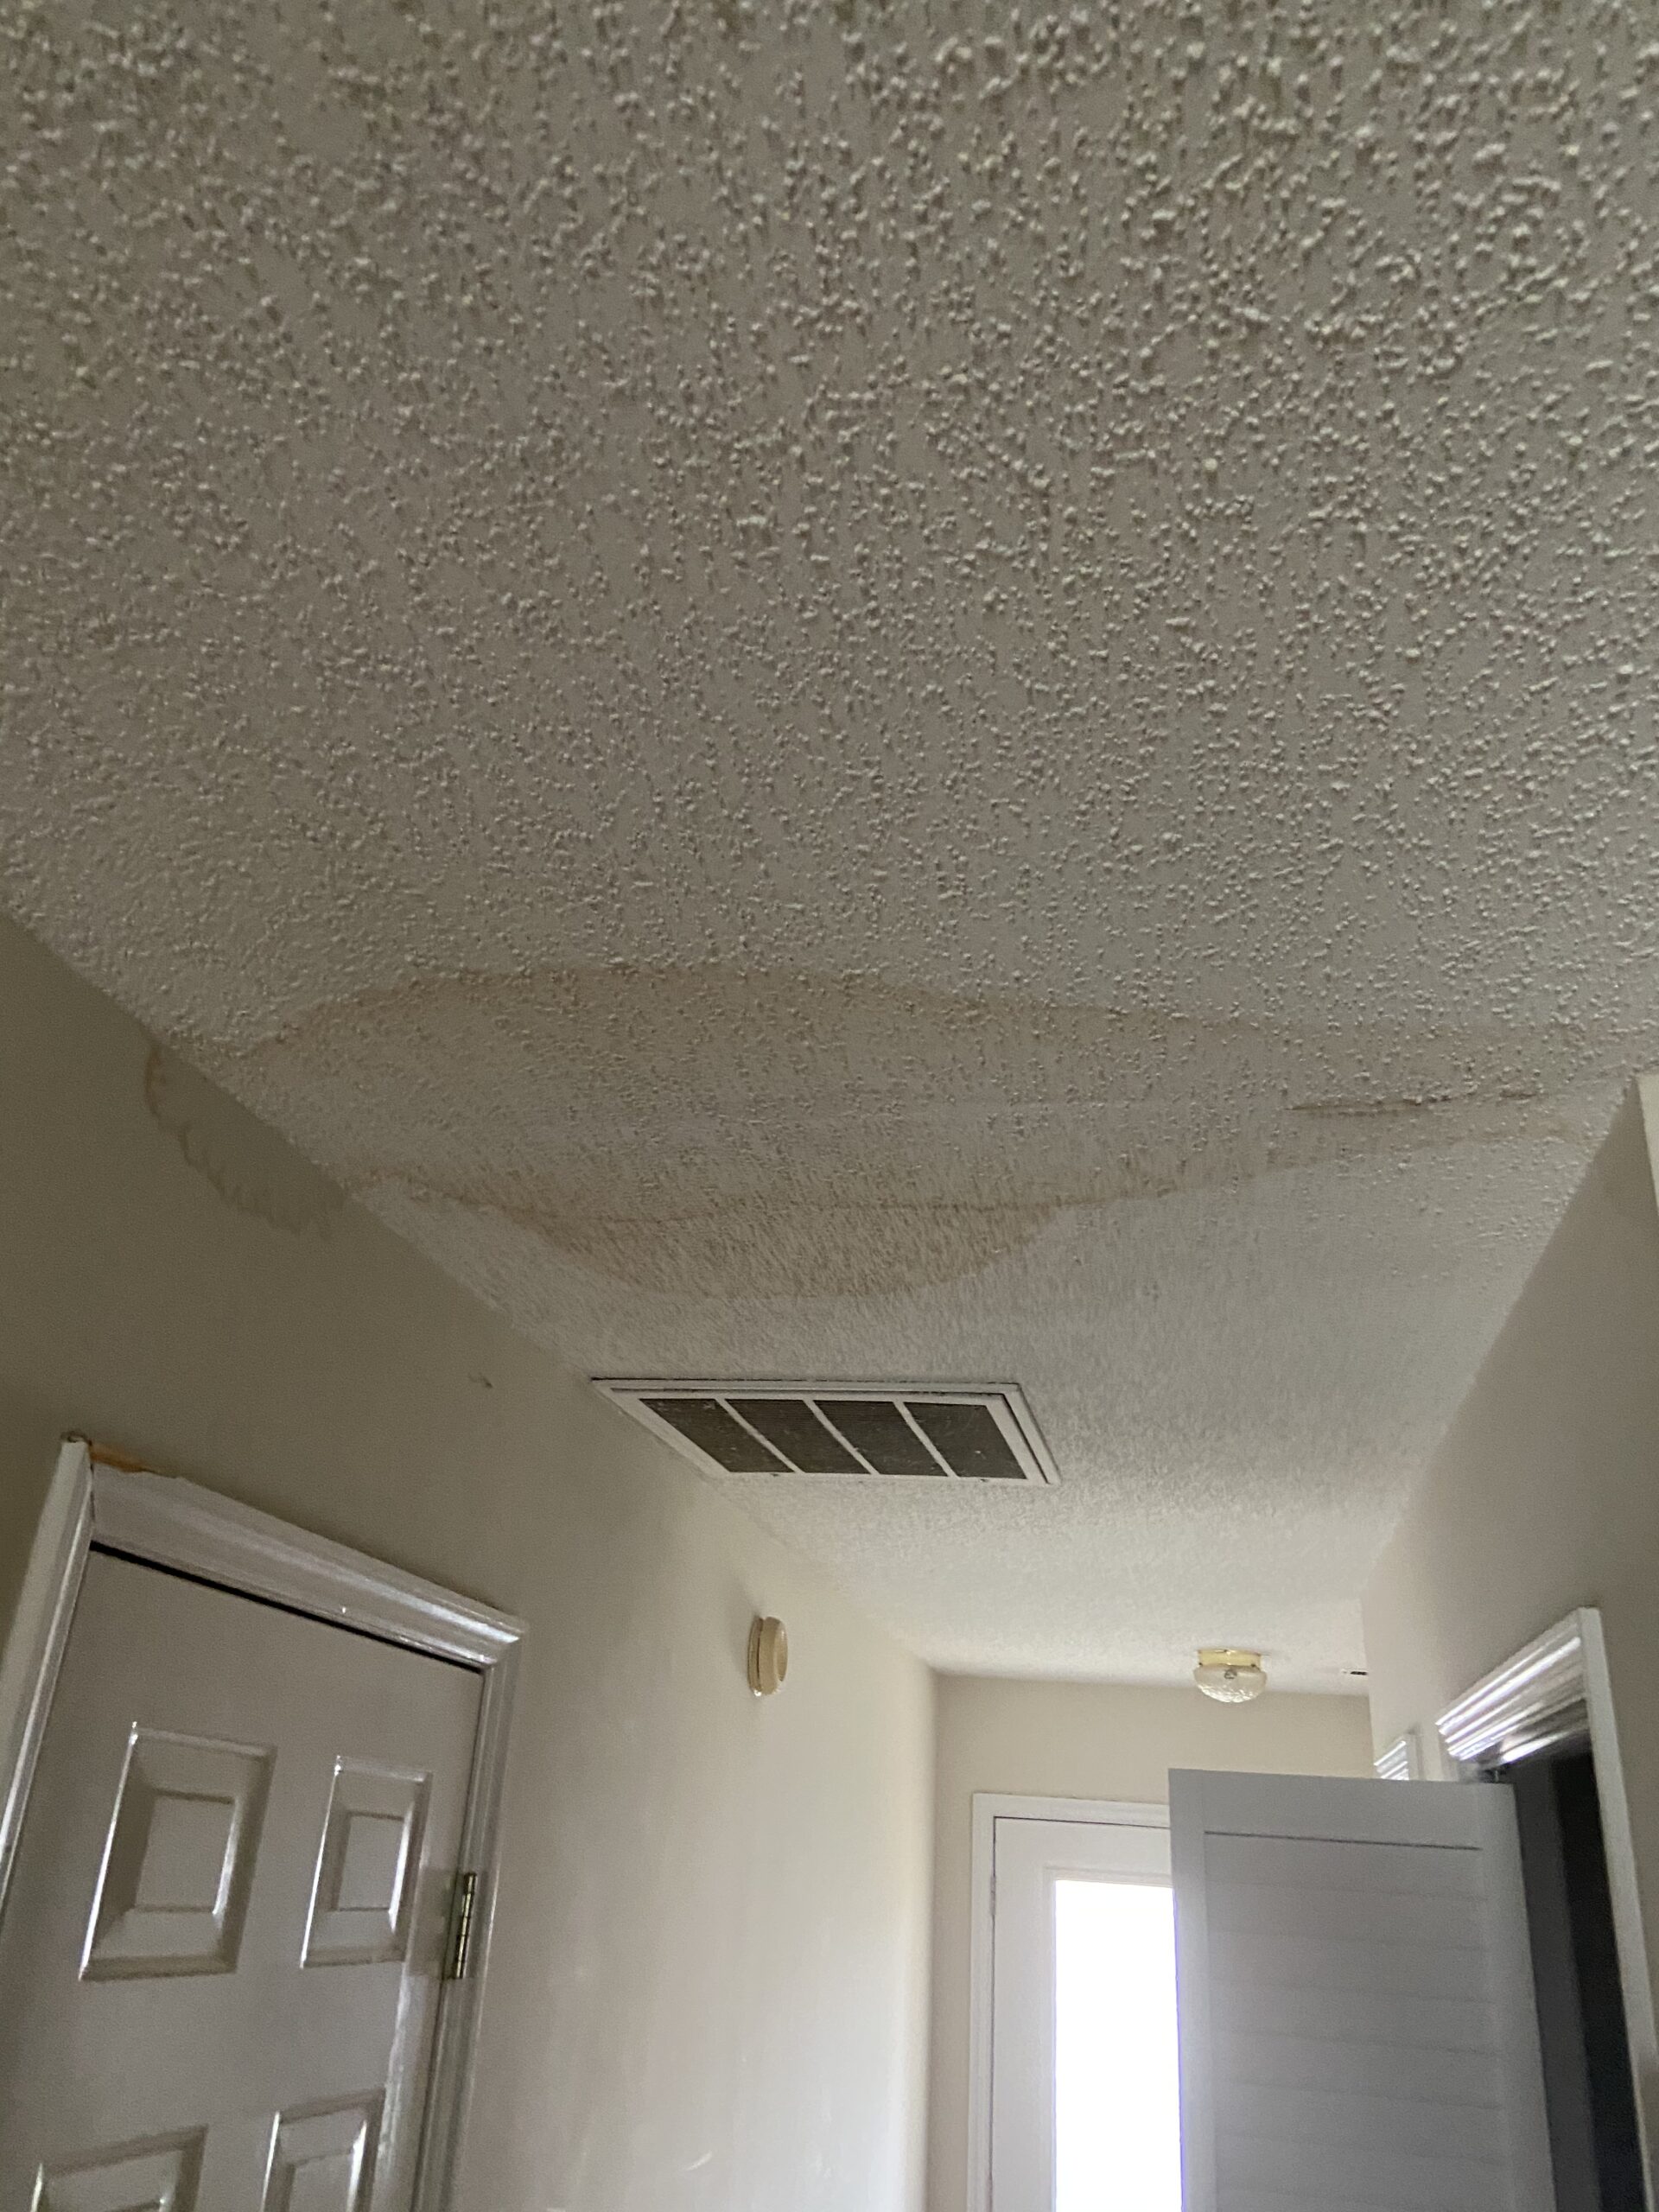 here is another roof leak and ceiling stain